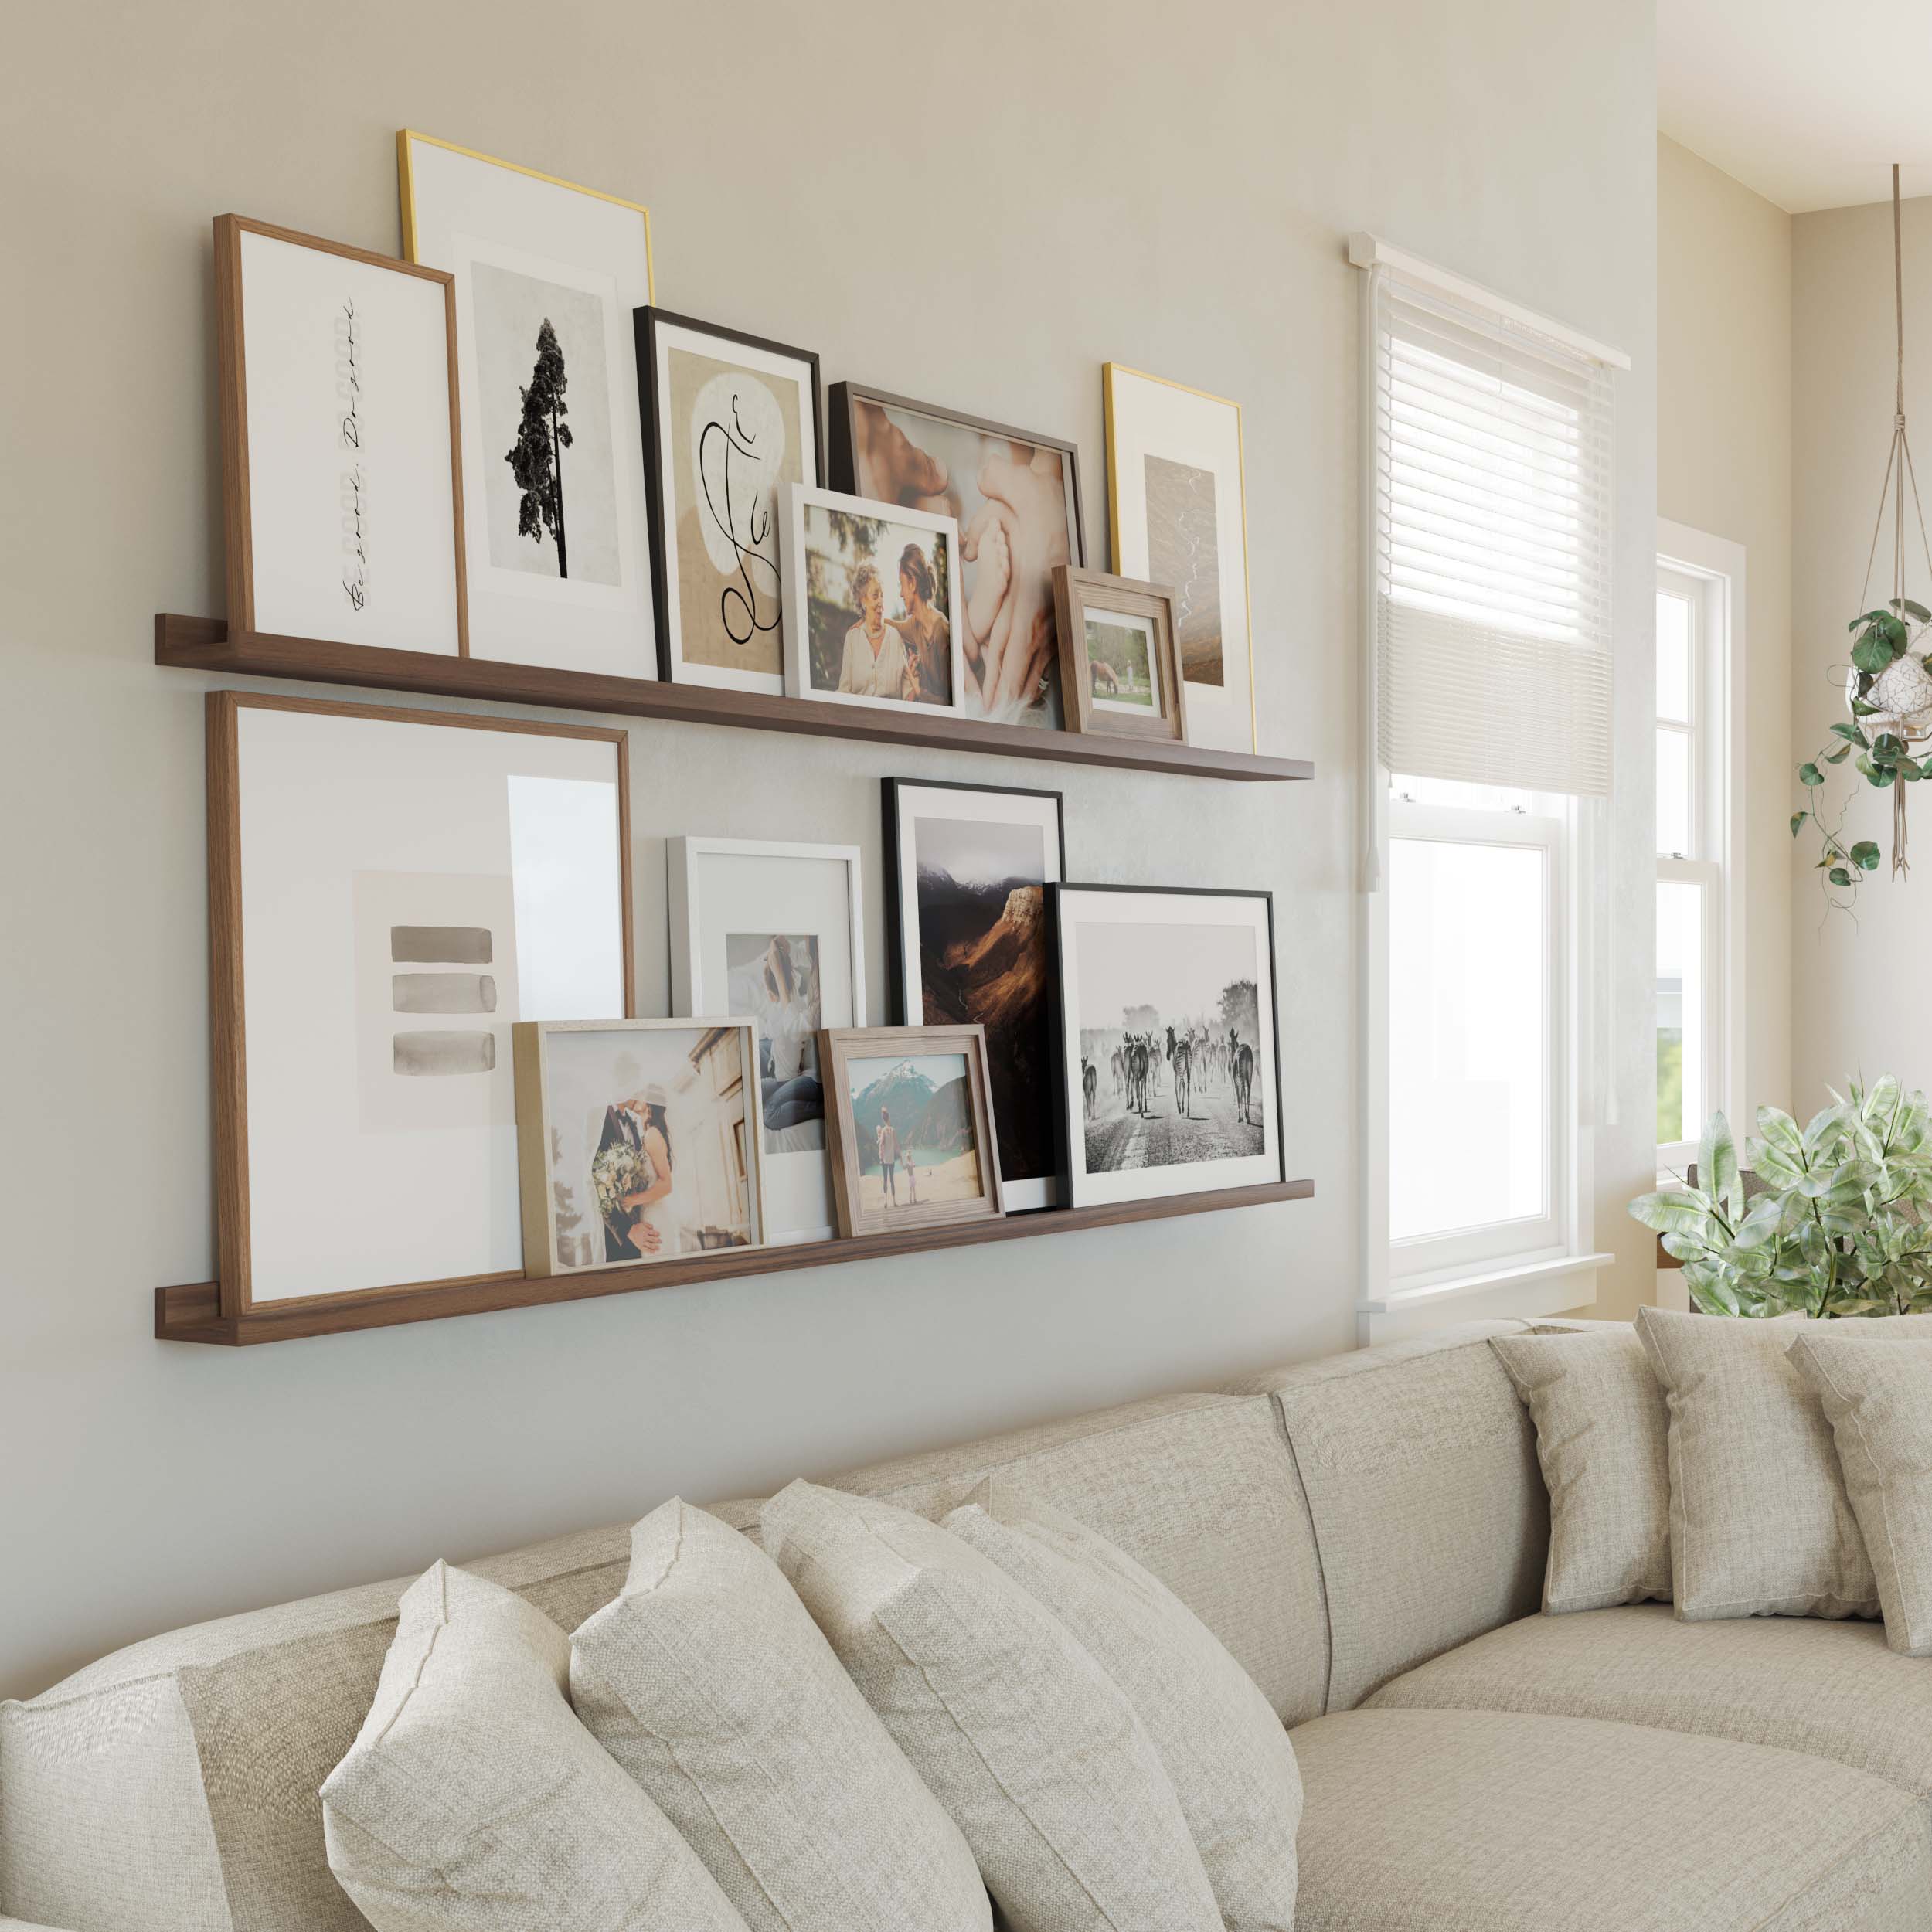 A living room wall adorned with 2 walnut display shelves exhibiting a variety of framed art, adding character to the cozy space.